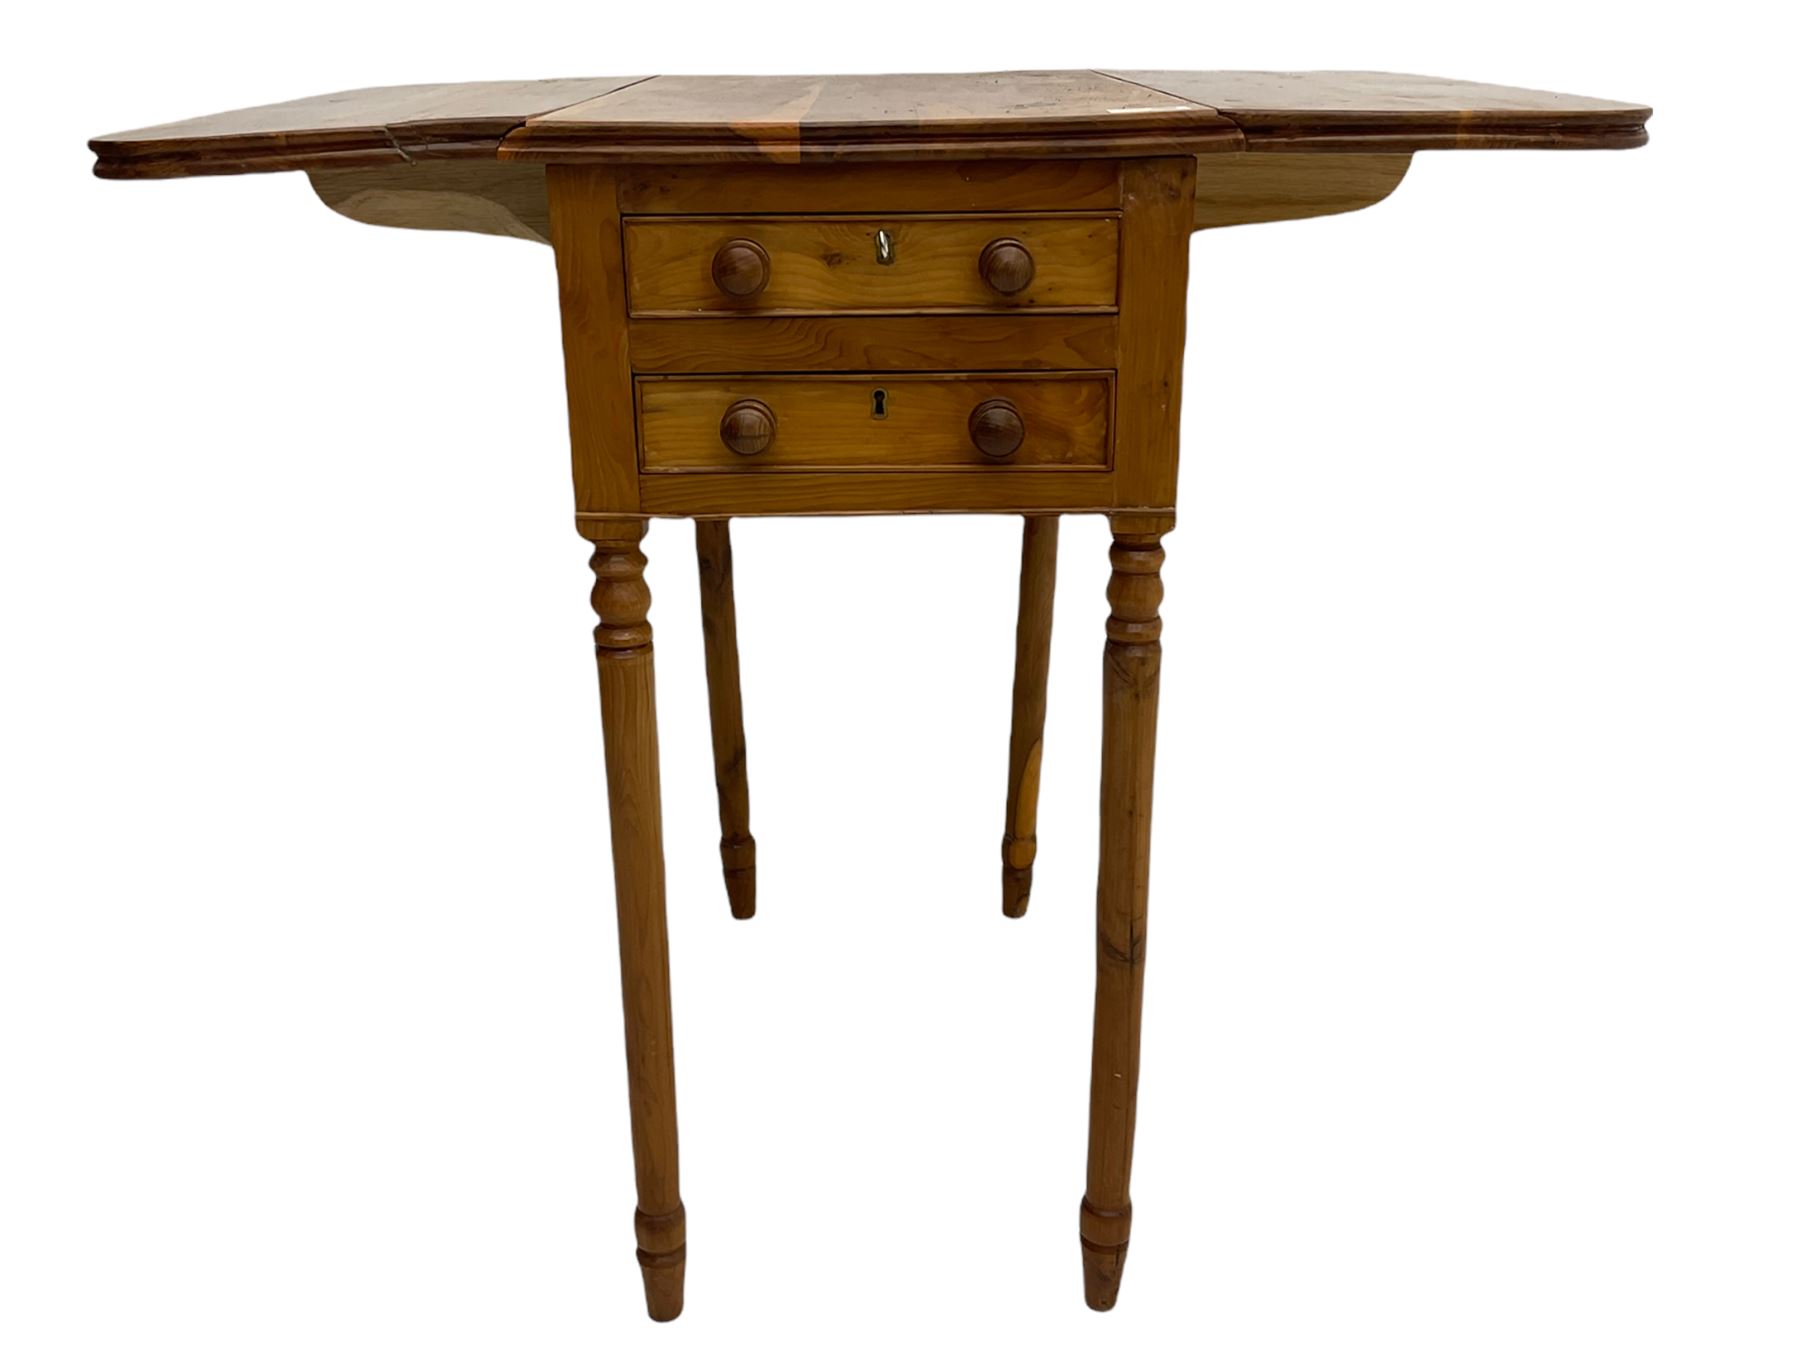 Yew wood drop leaf occasional table - Image 7 of 10